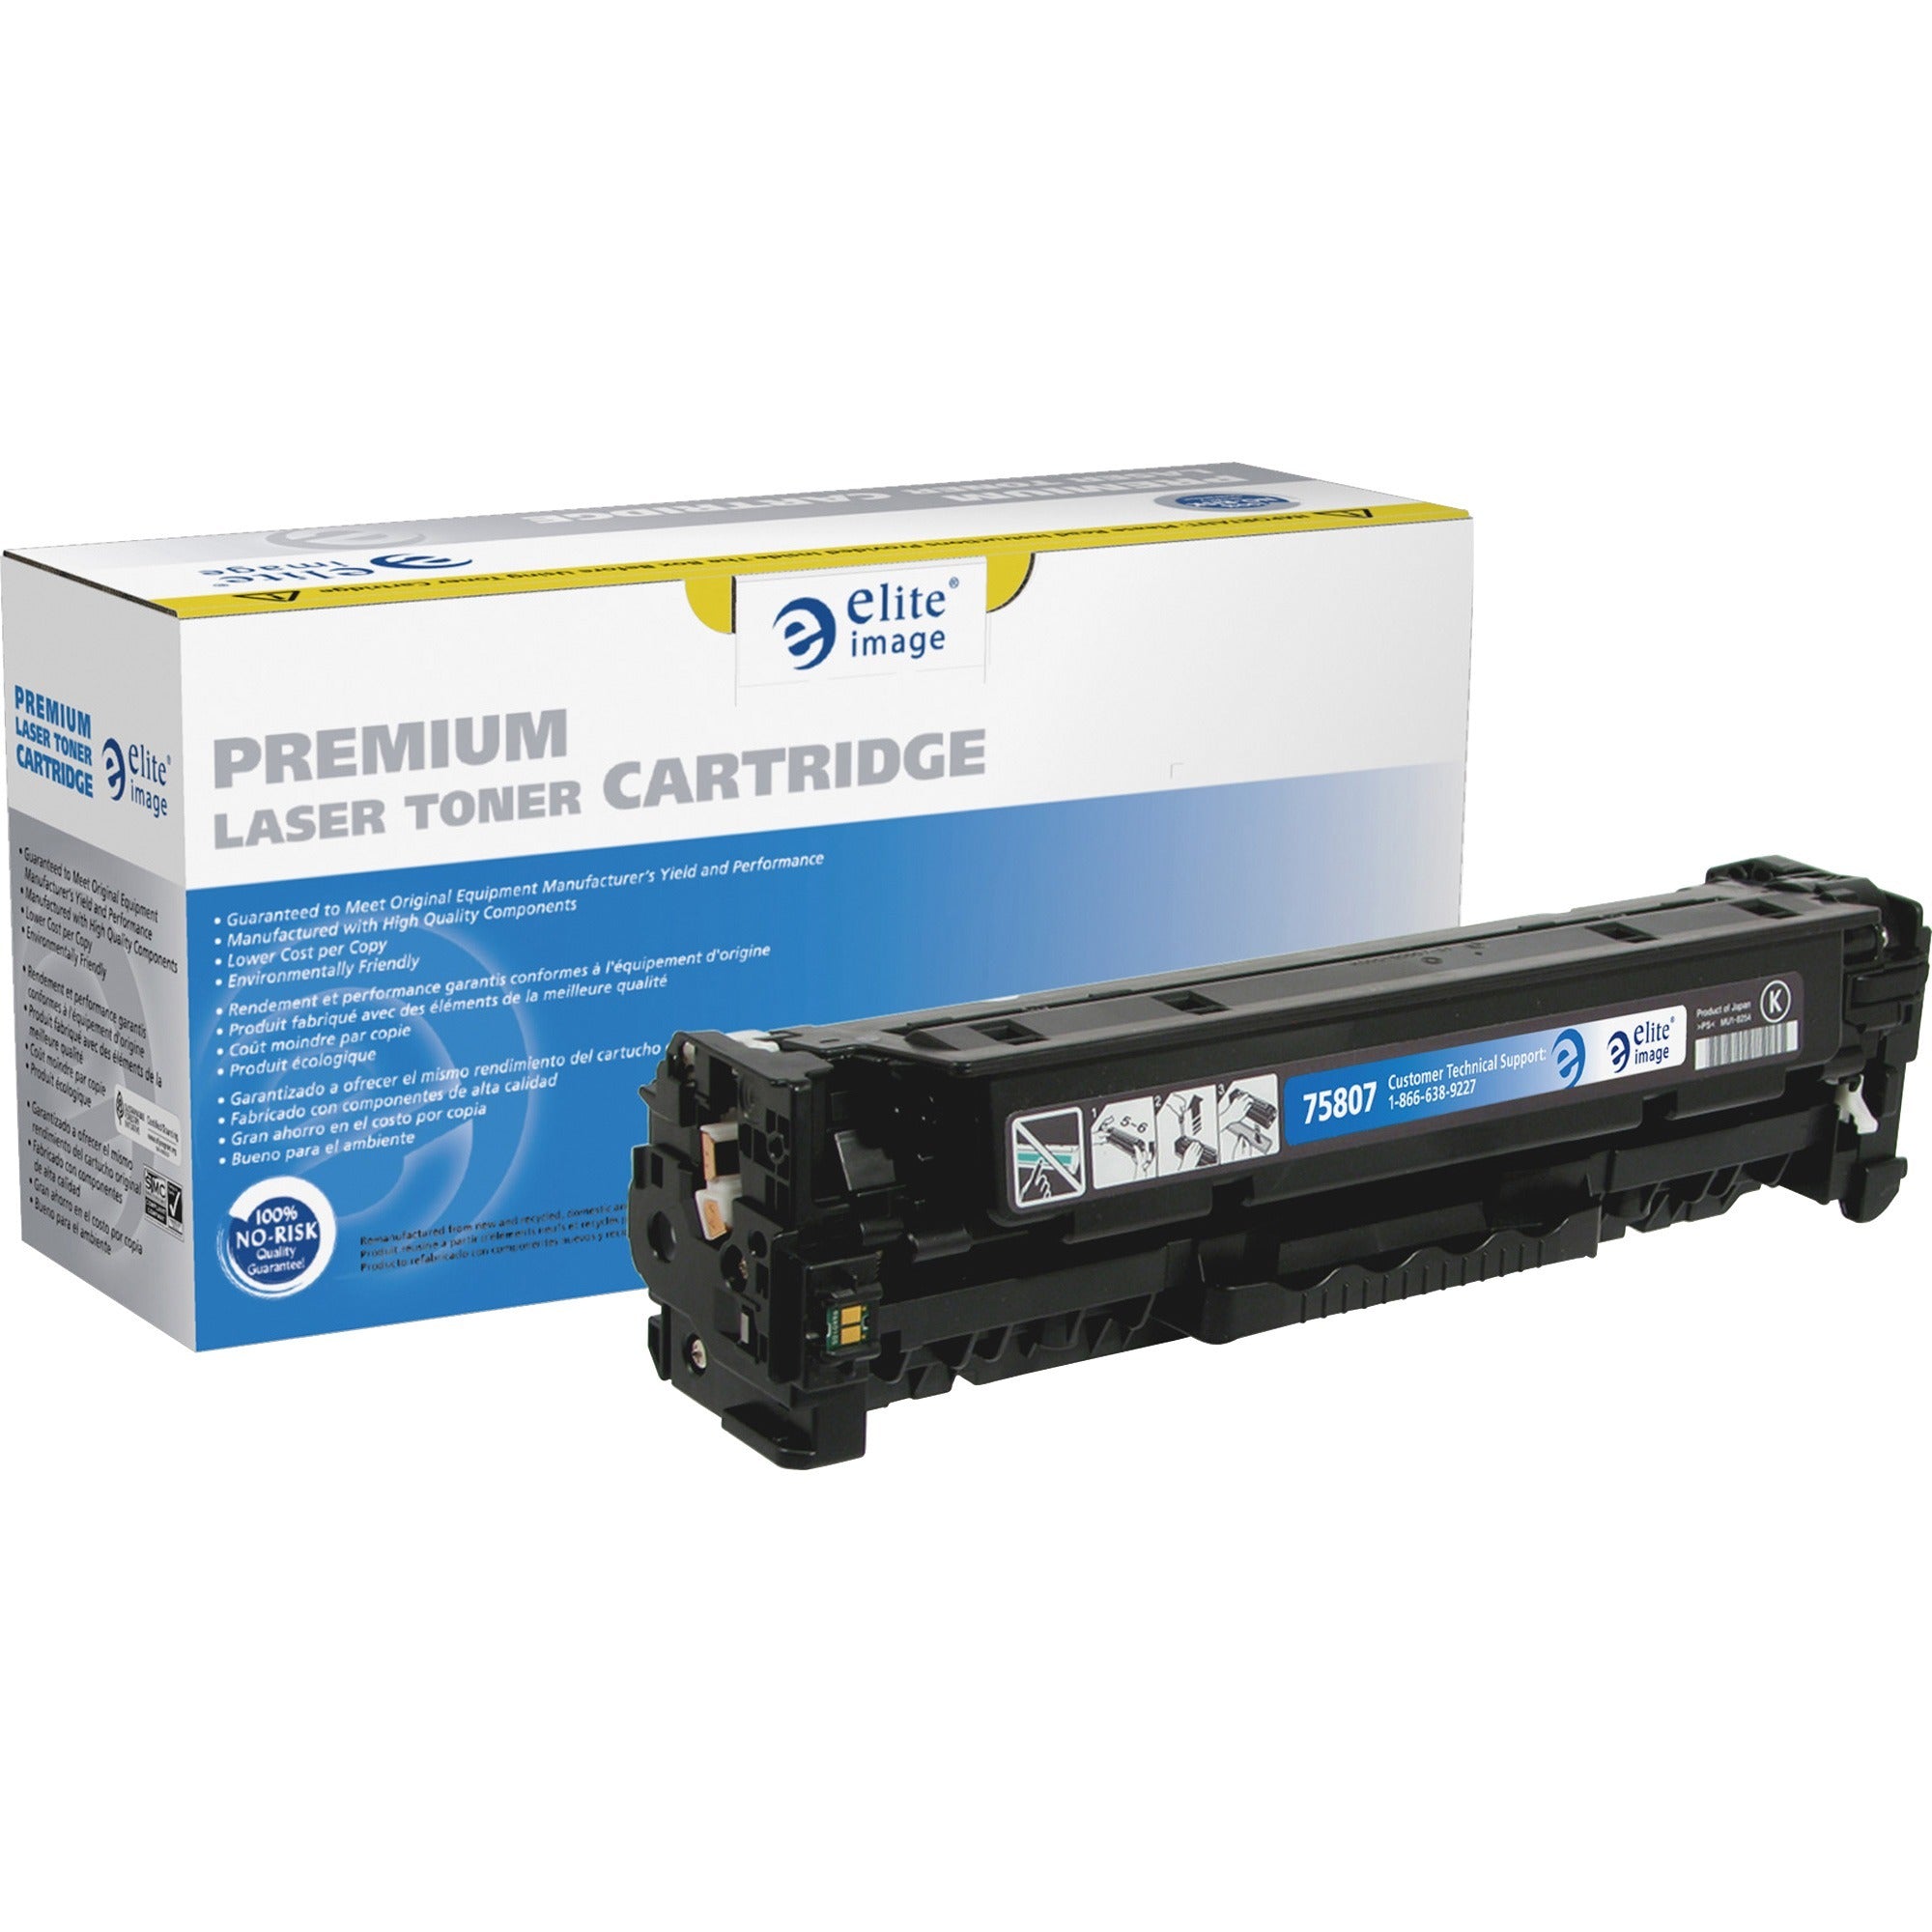 Elite Image Remanufactured High Yield Laser Toner Cartridge - Alternative for HP 305X (CE410X) - Black - 1 Each - 4000 Pages - 1